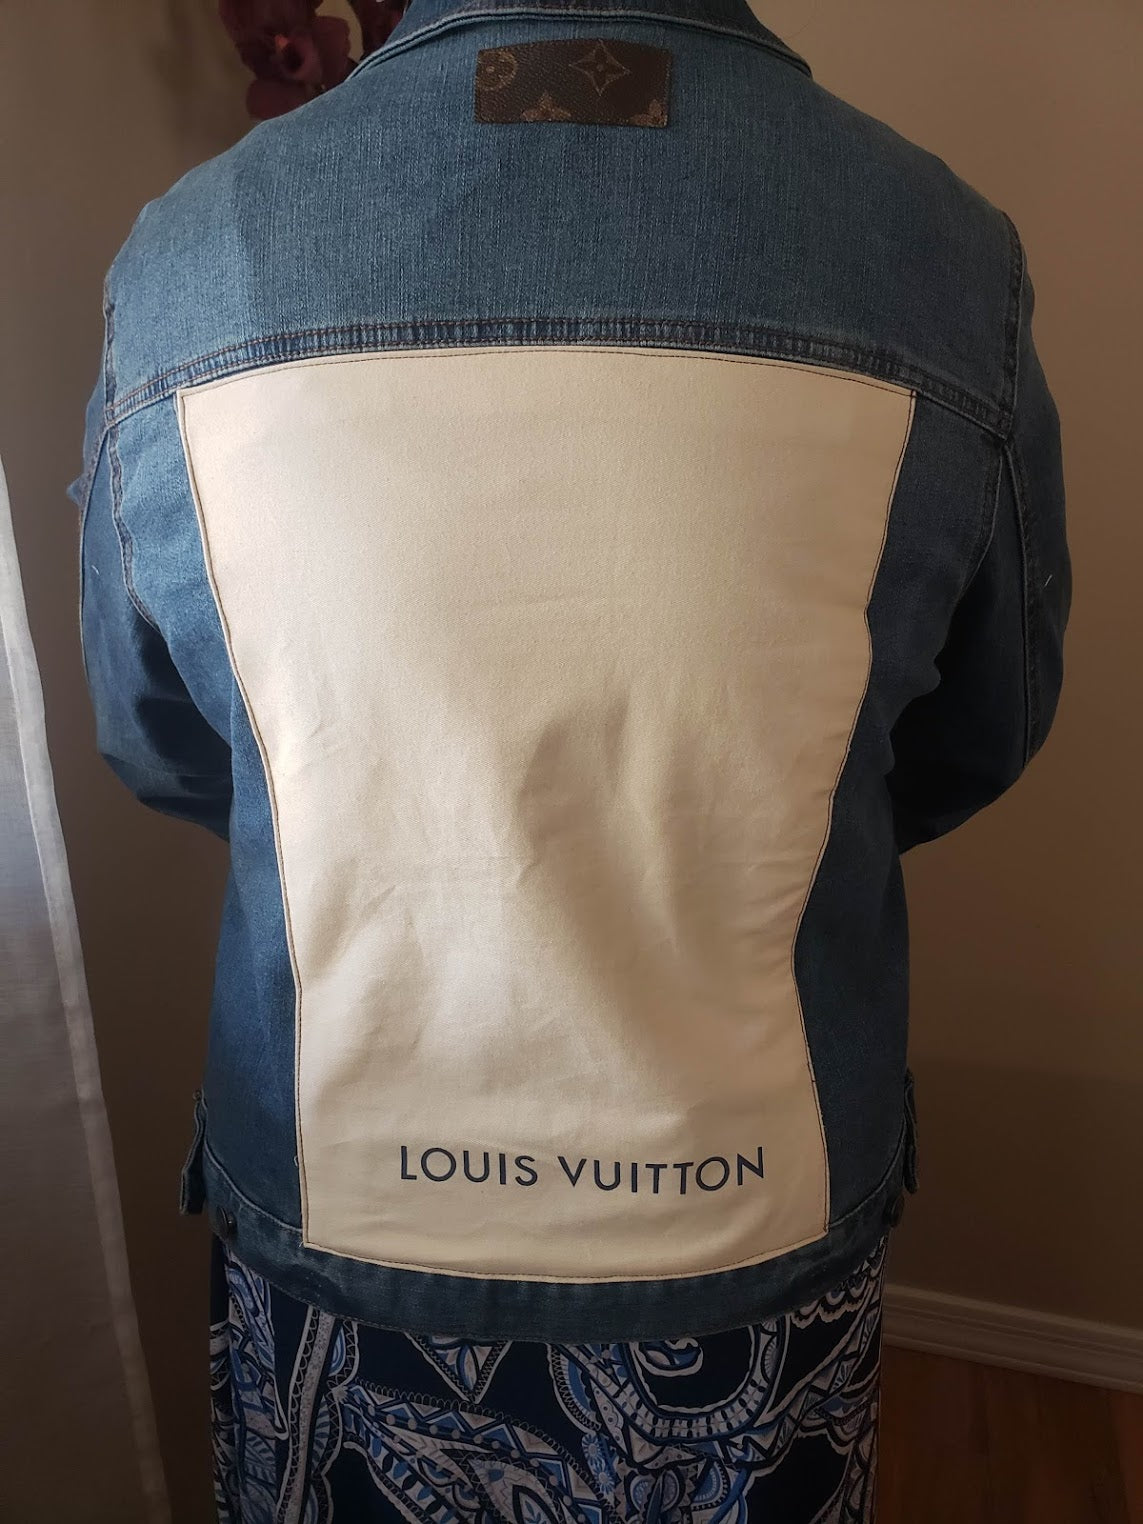 Young Designer Claims Louis Vuitton 'Ripped Off' Her Denim Idea – Sourcing  Journal